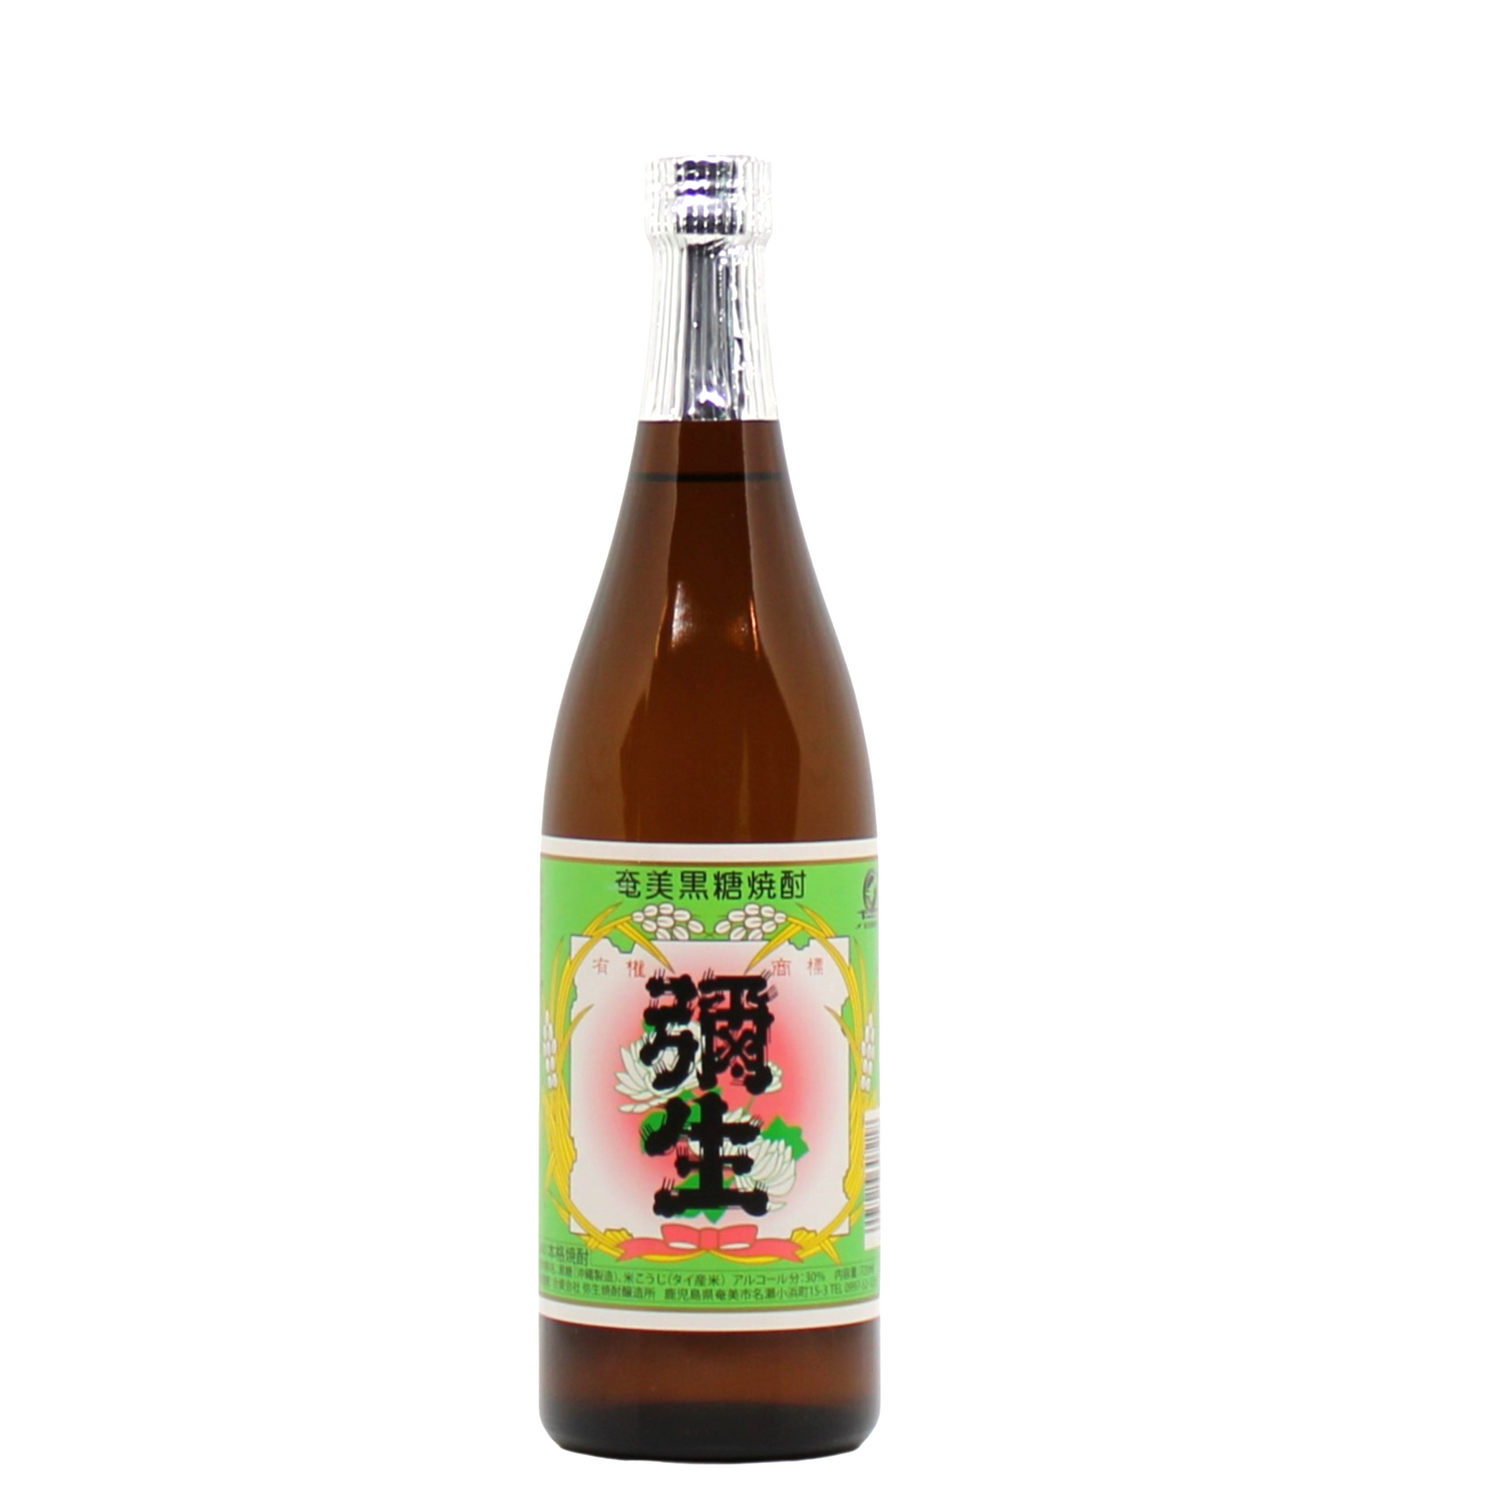 Yayoi Shochu Brewery, founded in 1922, is the oldest brewery in Amami Oshima. The representative label of Yayoi series. It deliver a host of flavours on your palate starting with a gentle sweetness and umami notes through the mid palate. You can casually enjoy it with any kind of meal.